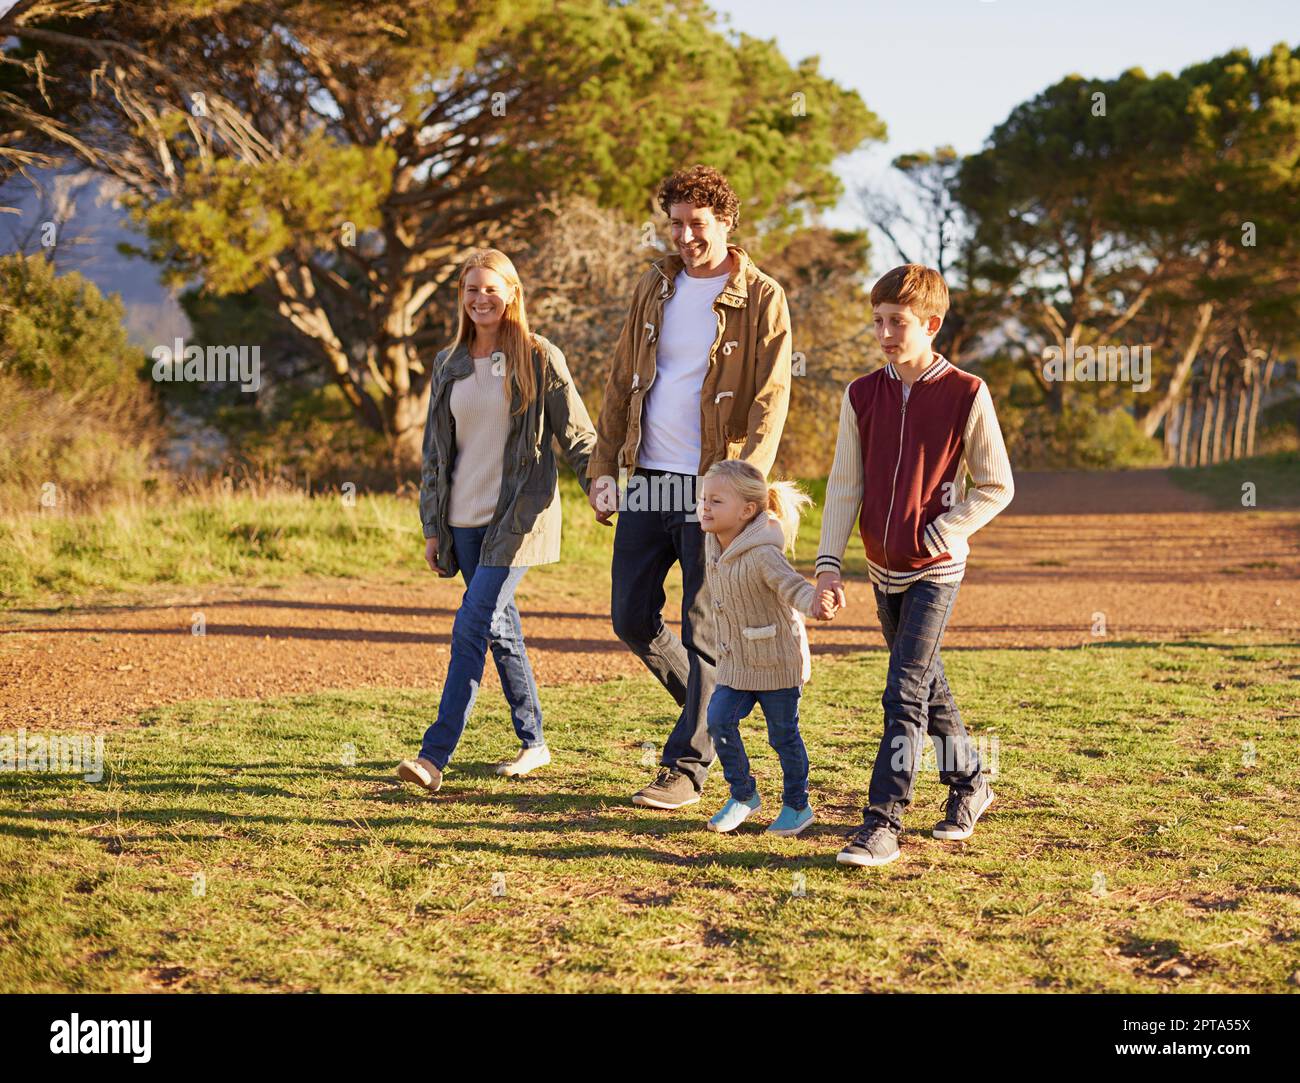 On a leisurely family stroll. a young family enjoying a walk in the outdoors Stock Photo